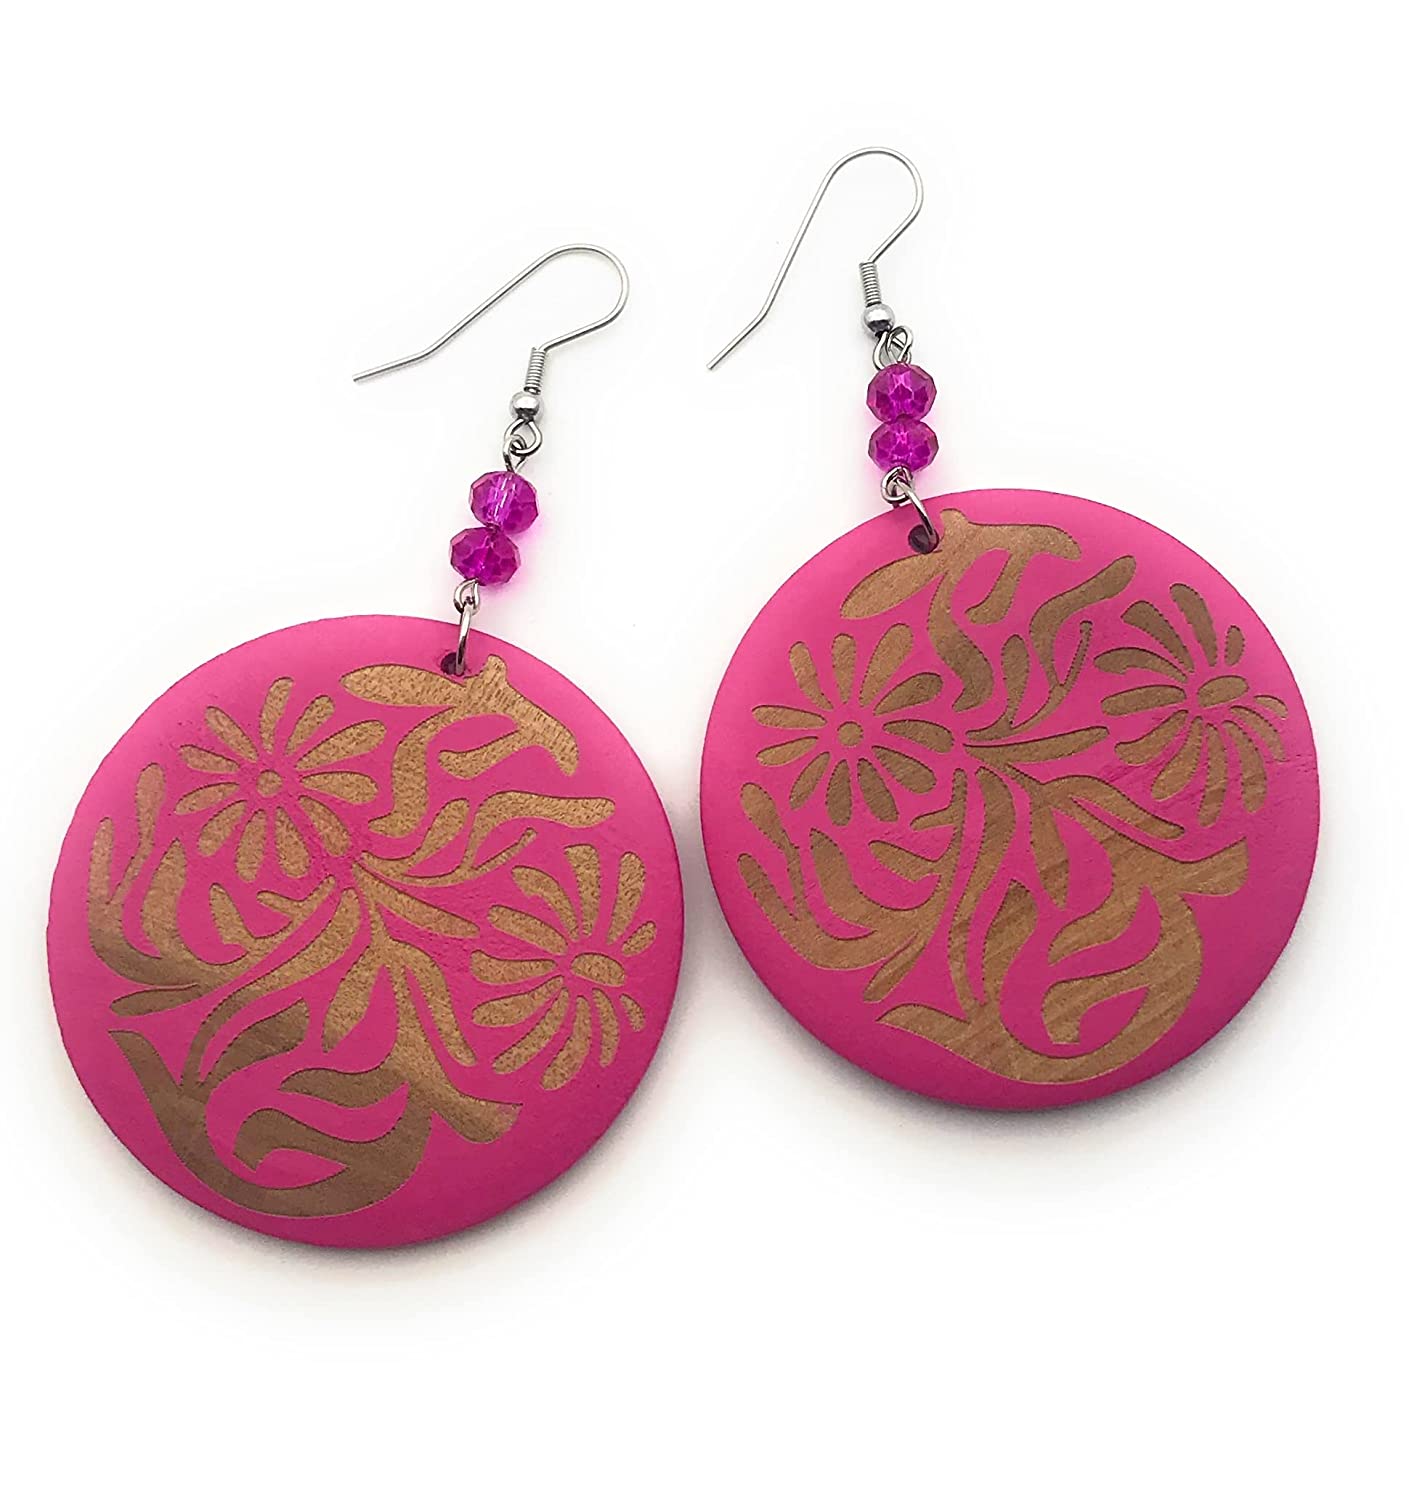 Hot Pink Wooden Dangle Earrings with Beaded Accents from Scott D Jewelry Designs